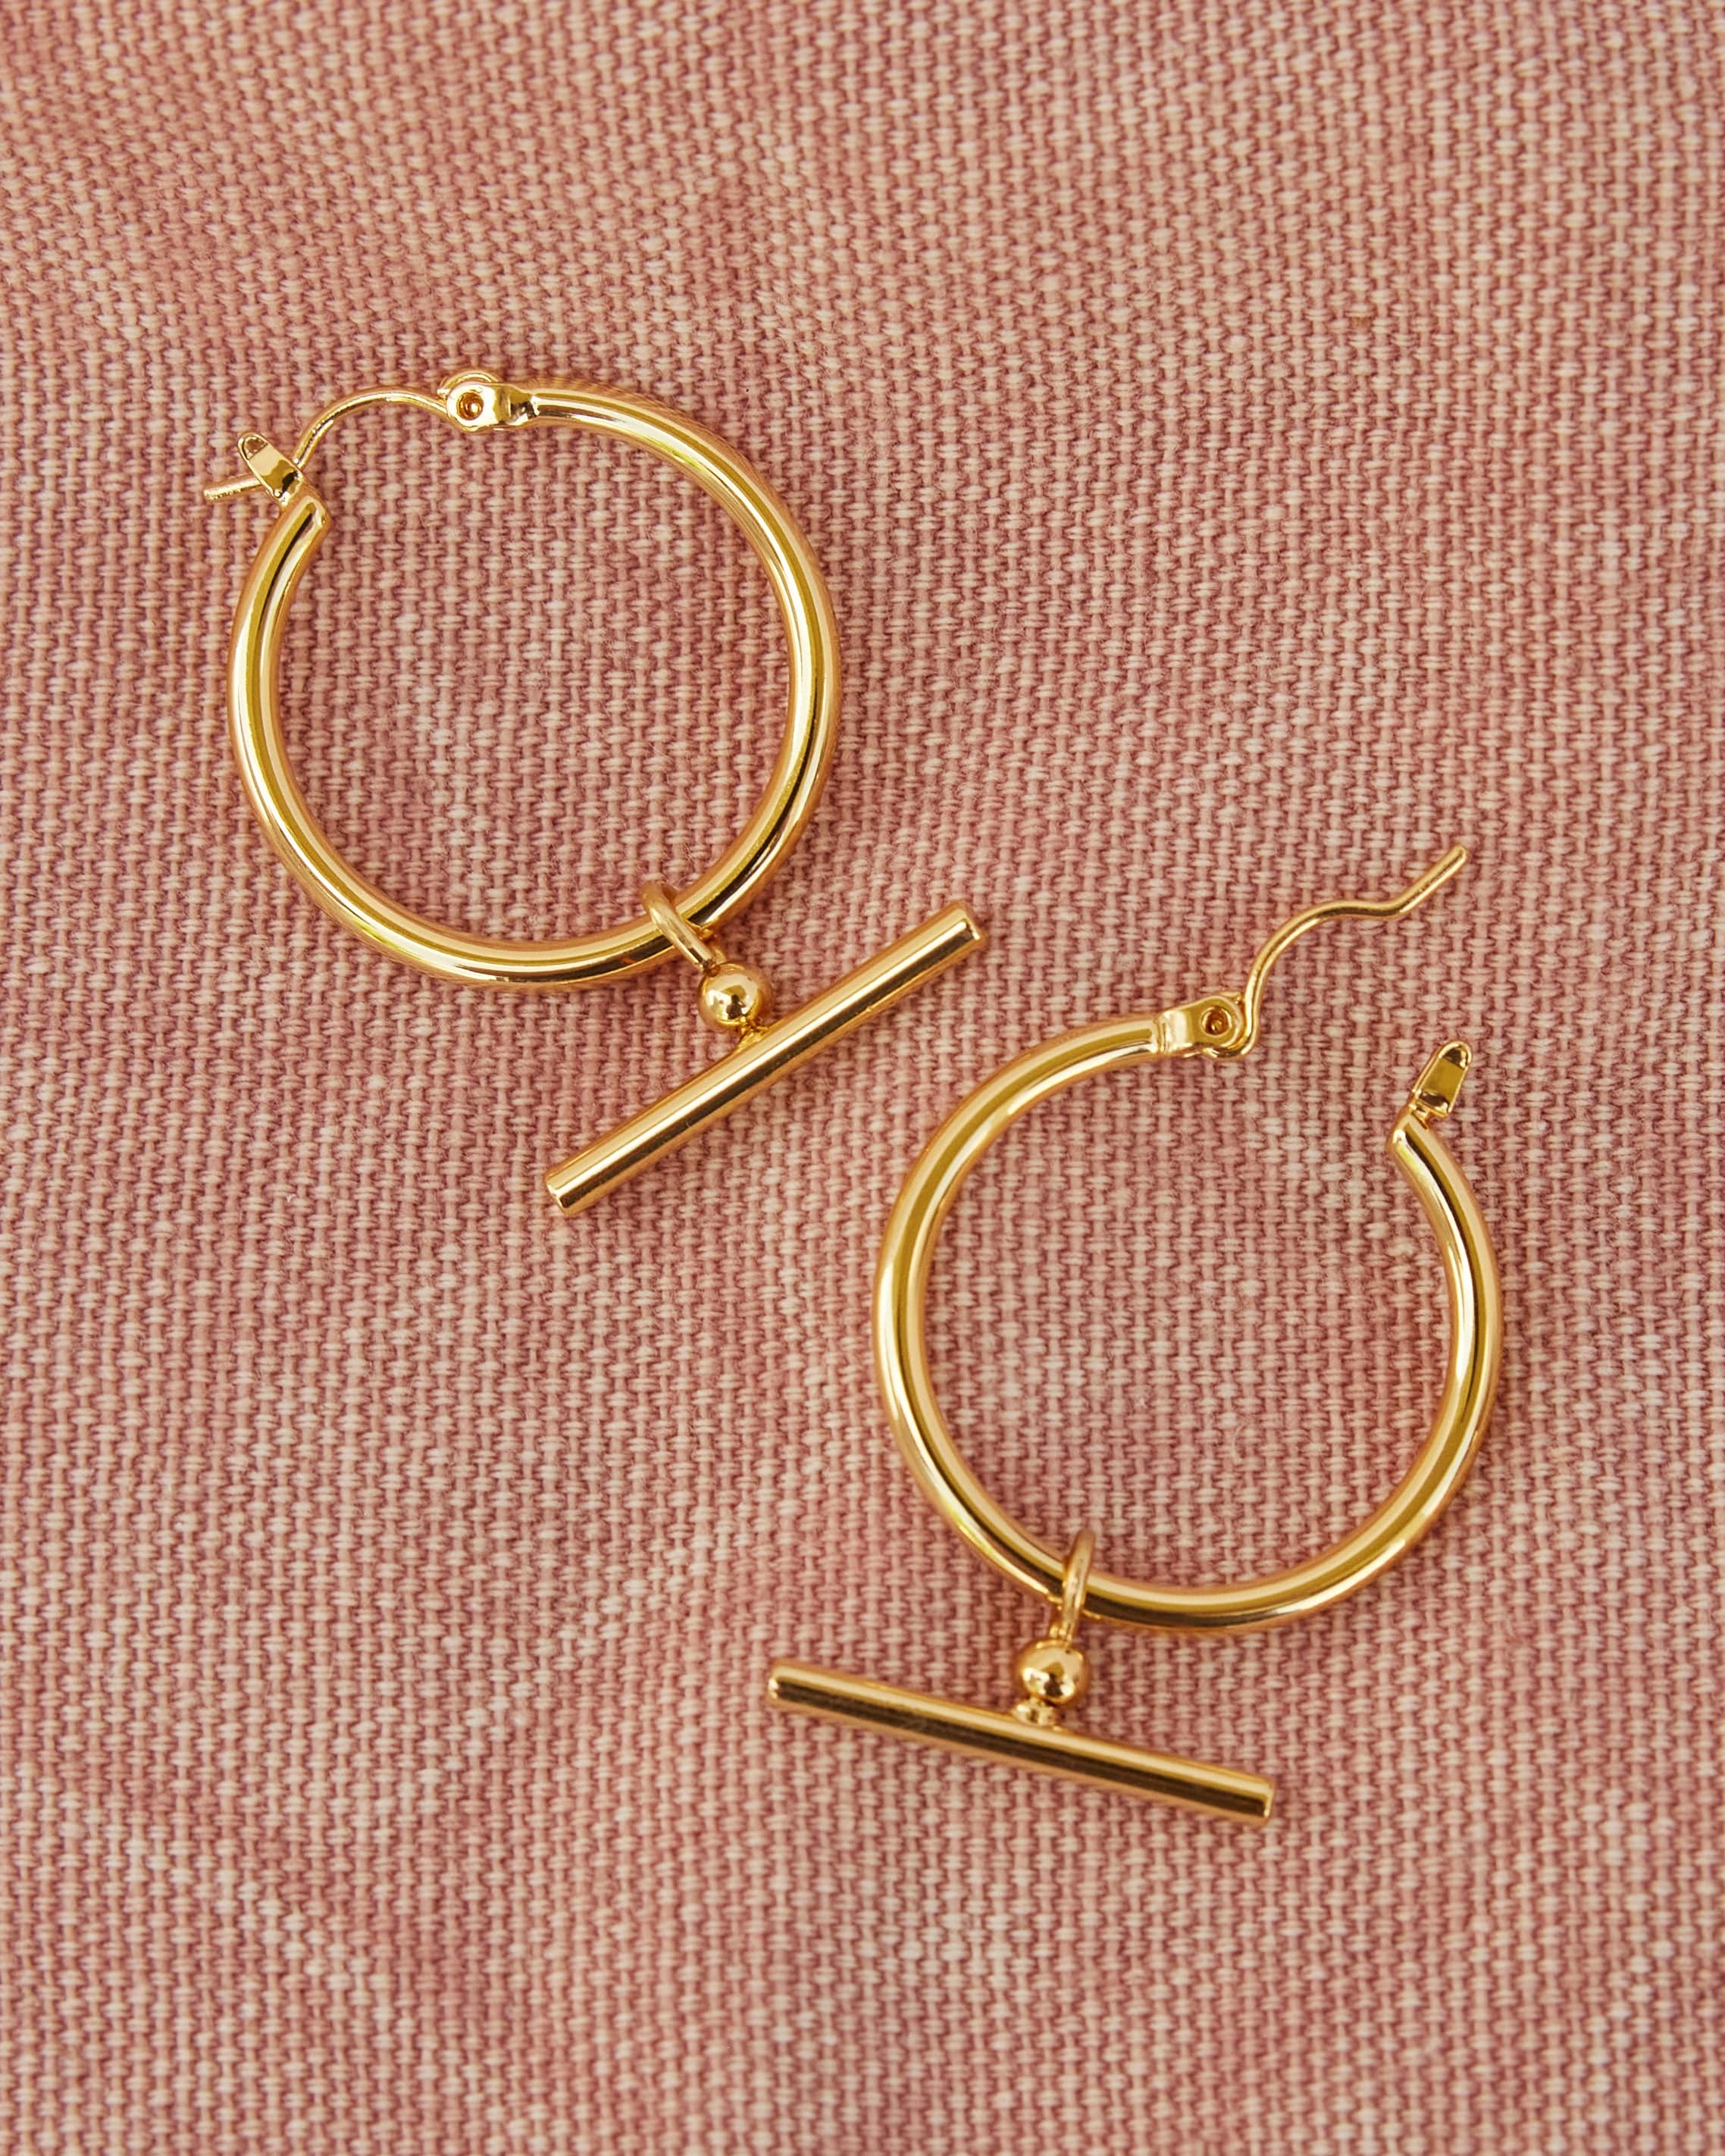 Gold huggie hoops with t-bar in middle